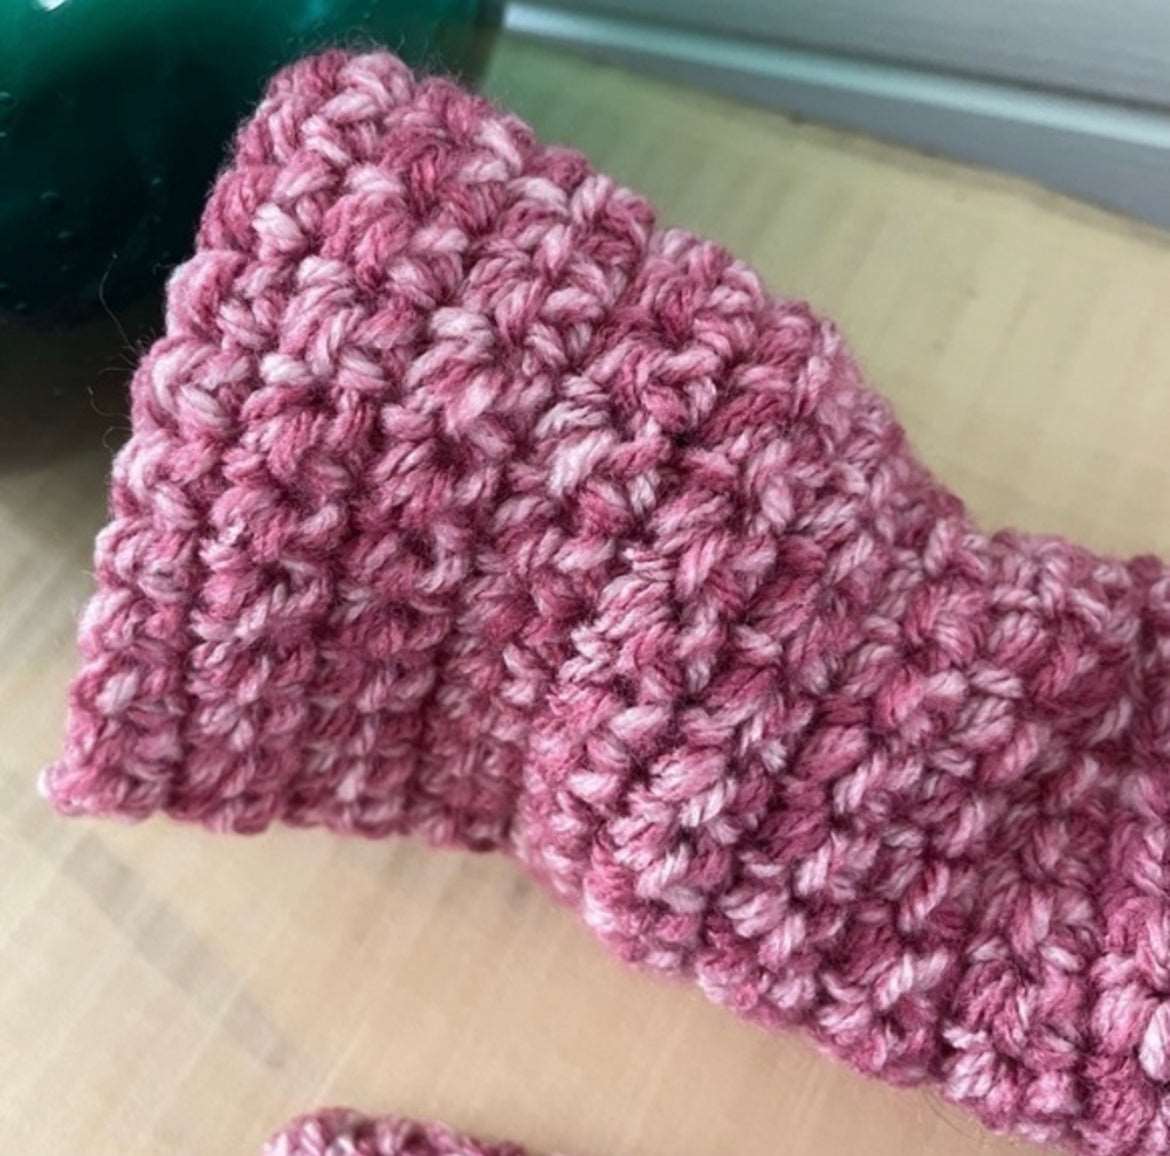 Fingerless Gloves in Pink Marble Gaming Texting Hand Crocheted Wrist Warmers